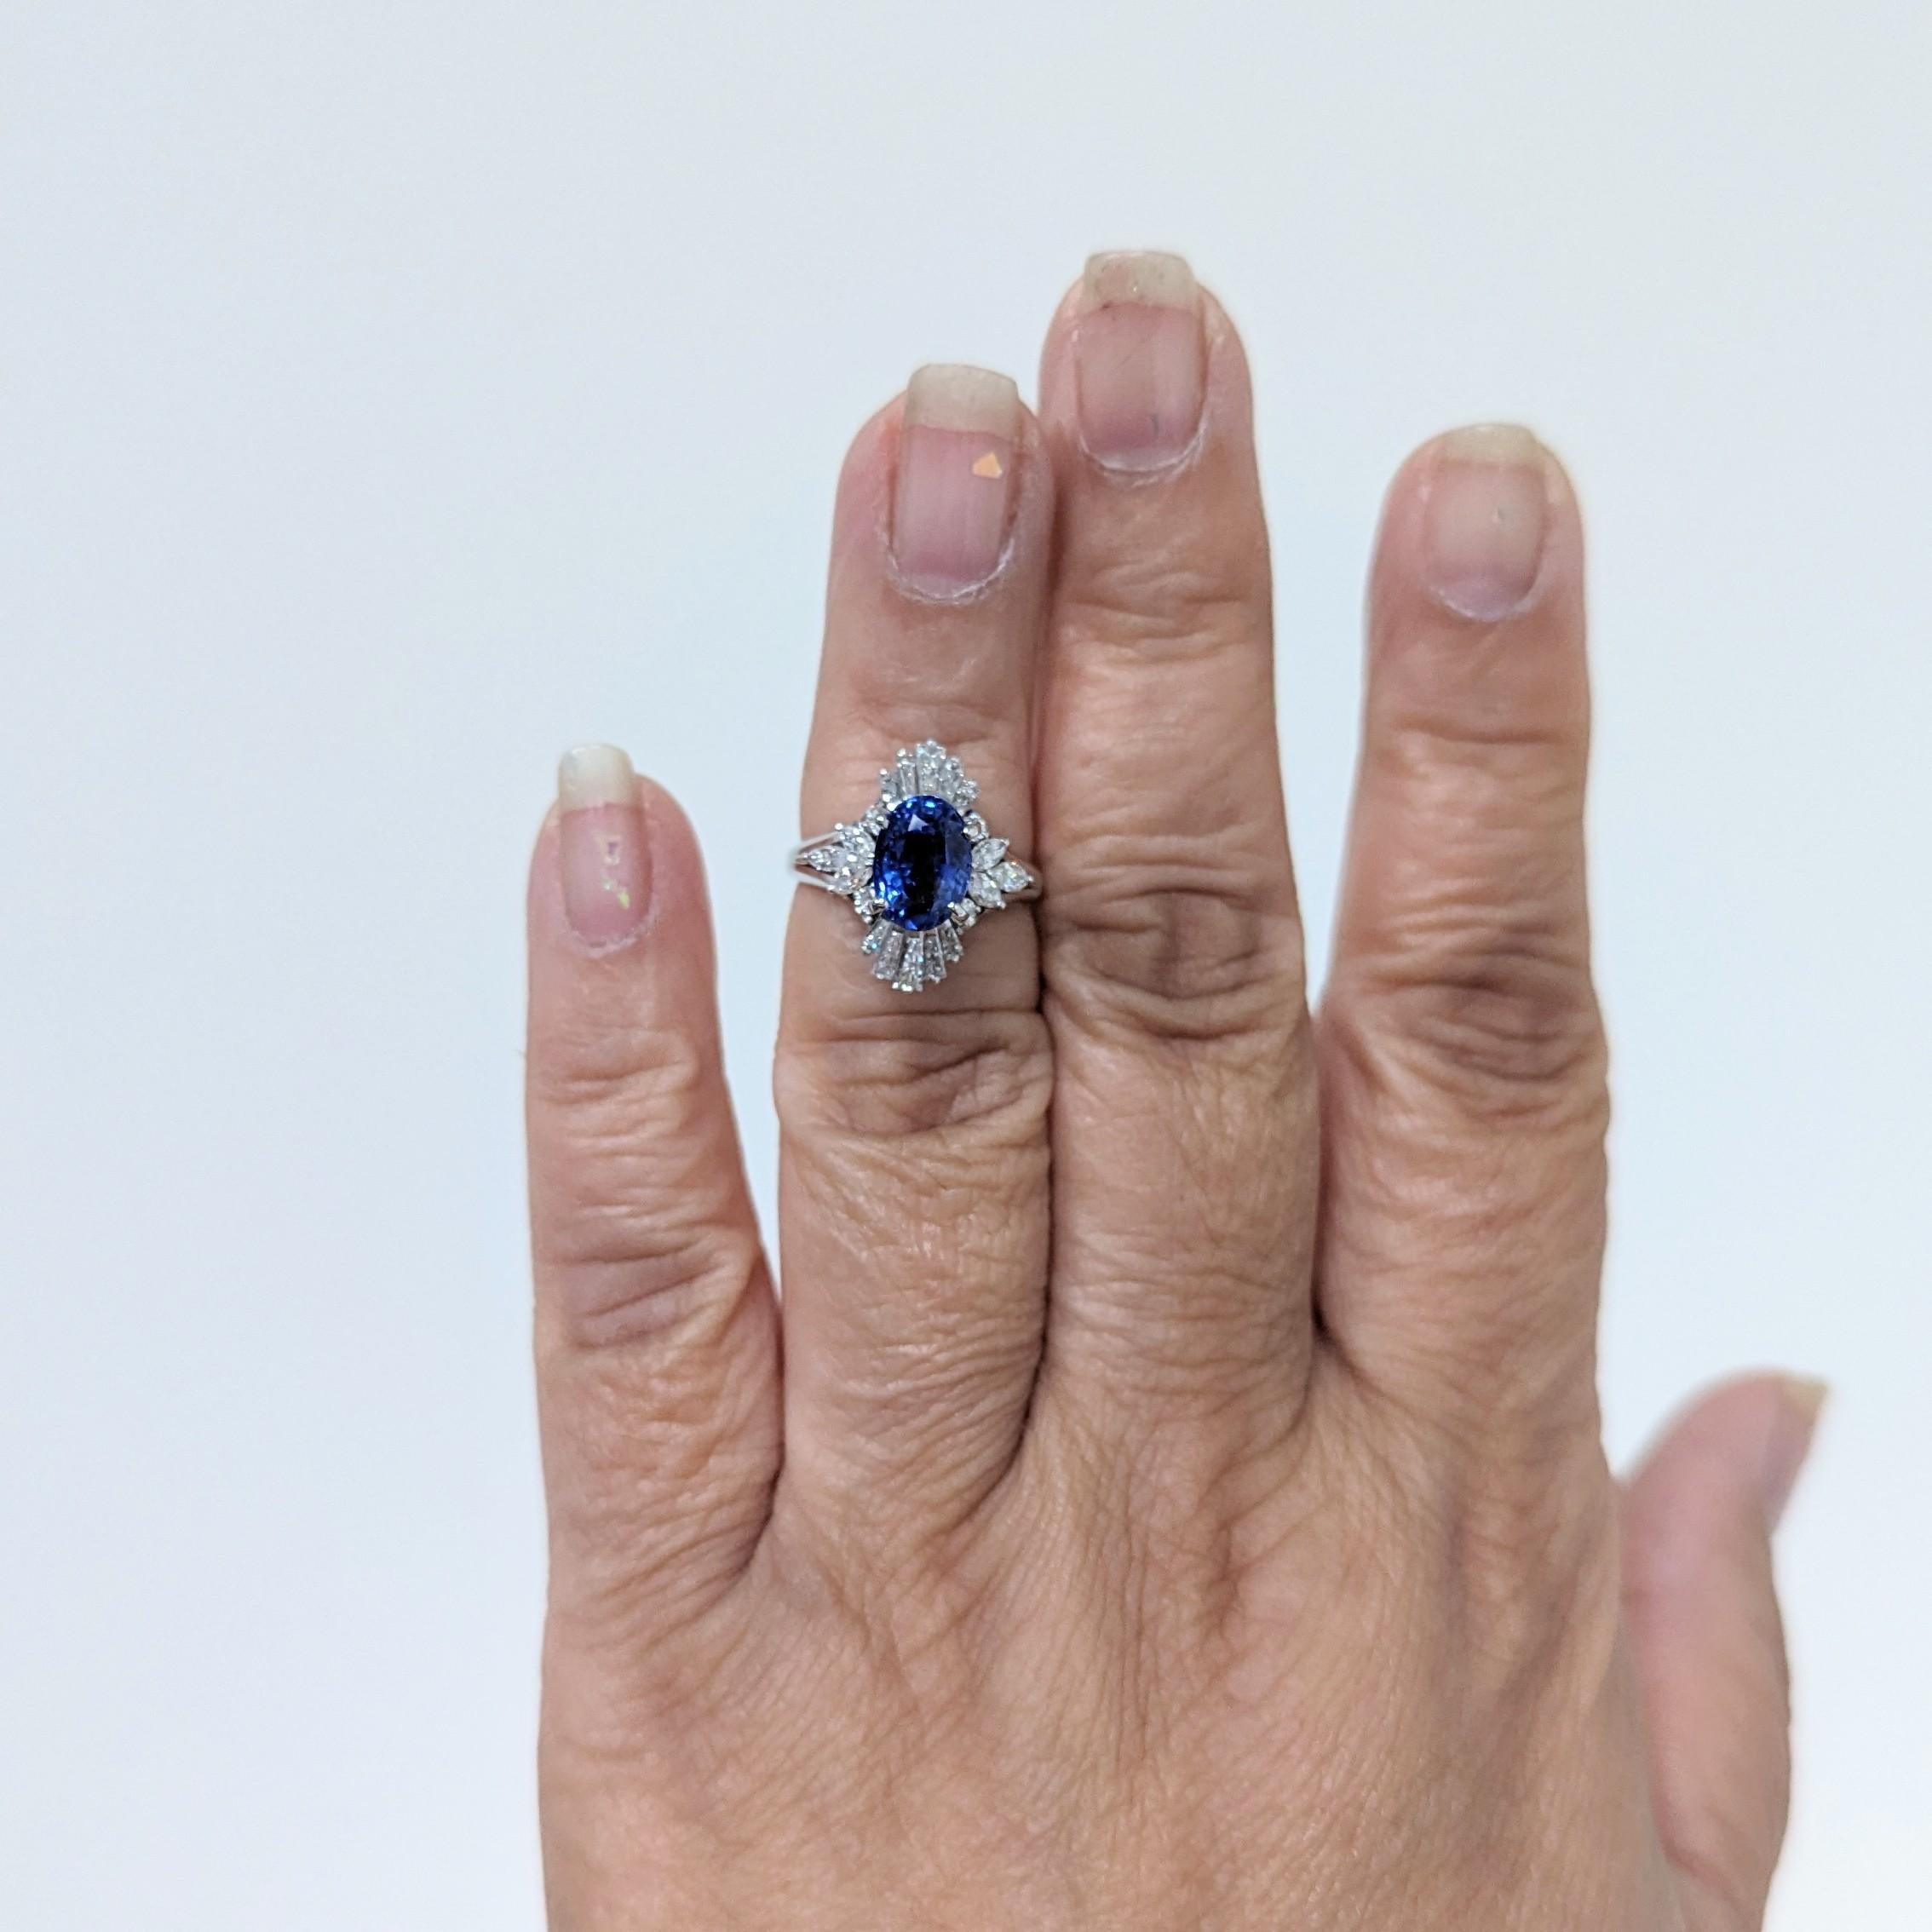 Gorgeous 3.39 ct. blue sapphire oval with 1.04 ct. good quality, white, and bright diamond baguettes and marquise shapes.  Handmade in platinum.  Ring size 5.5.